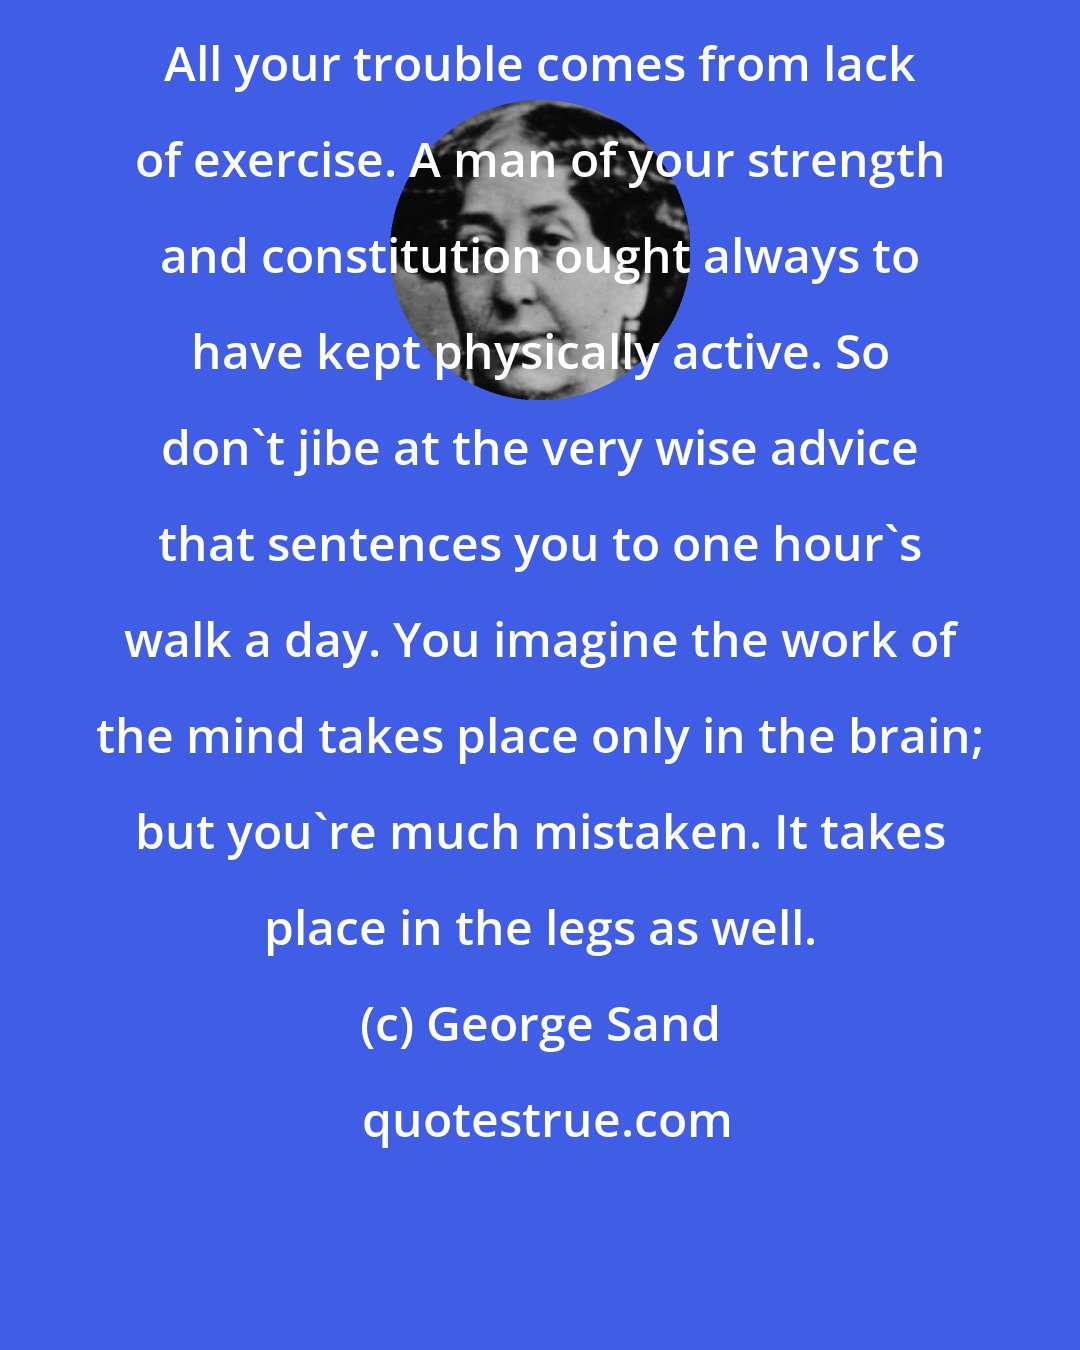 George Sand: All your trouble comes from lack of exercise. A man of your strength and constitution ought always to have kept physically active. So don't jibe at the very wise advice that sentences you to one hour's walk a day. You imagine the work of the mind takes place only in the brain; but you're much mistaken. It takes place in the legs as well.